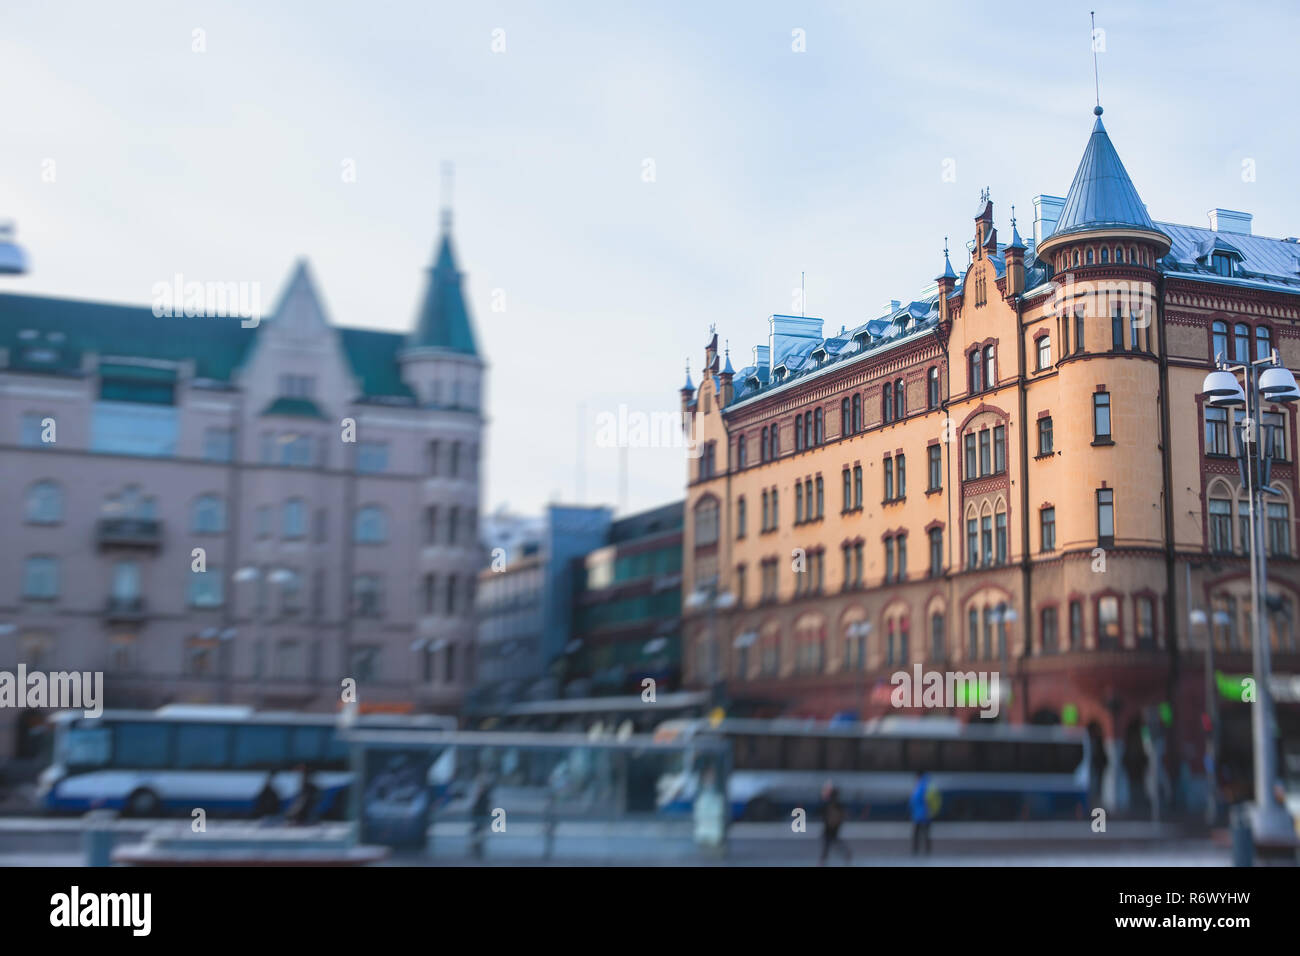 Winter view of Tampere, a city in Pirkanmaa, southern Finland Stock Photo